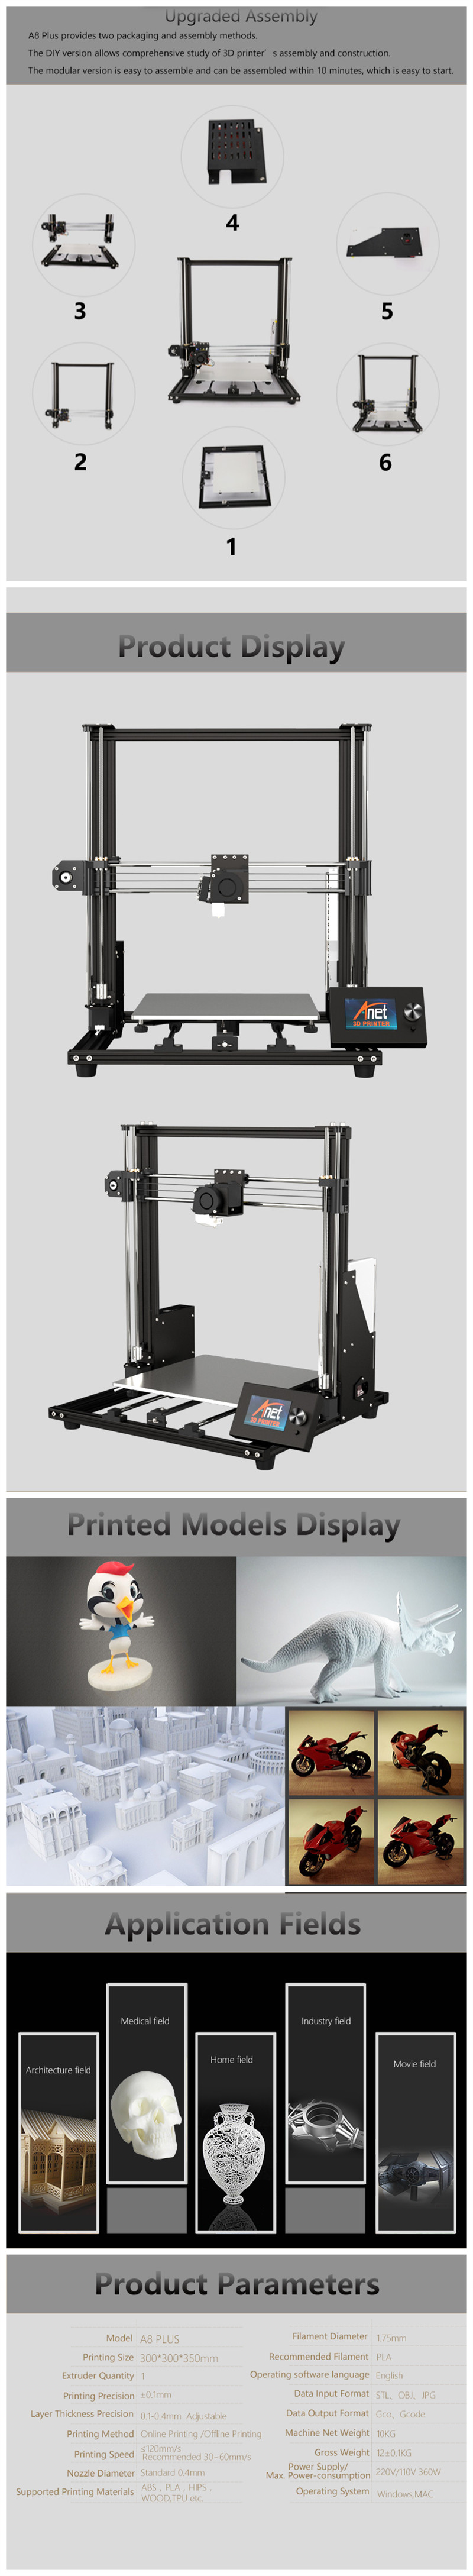 Anetreg-A8-Plus-DIY-3D-Printer-Kit-300300350mm-Printing-Size-With-Magnetic-Movable-ScreenDual-Z-axis-1412500